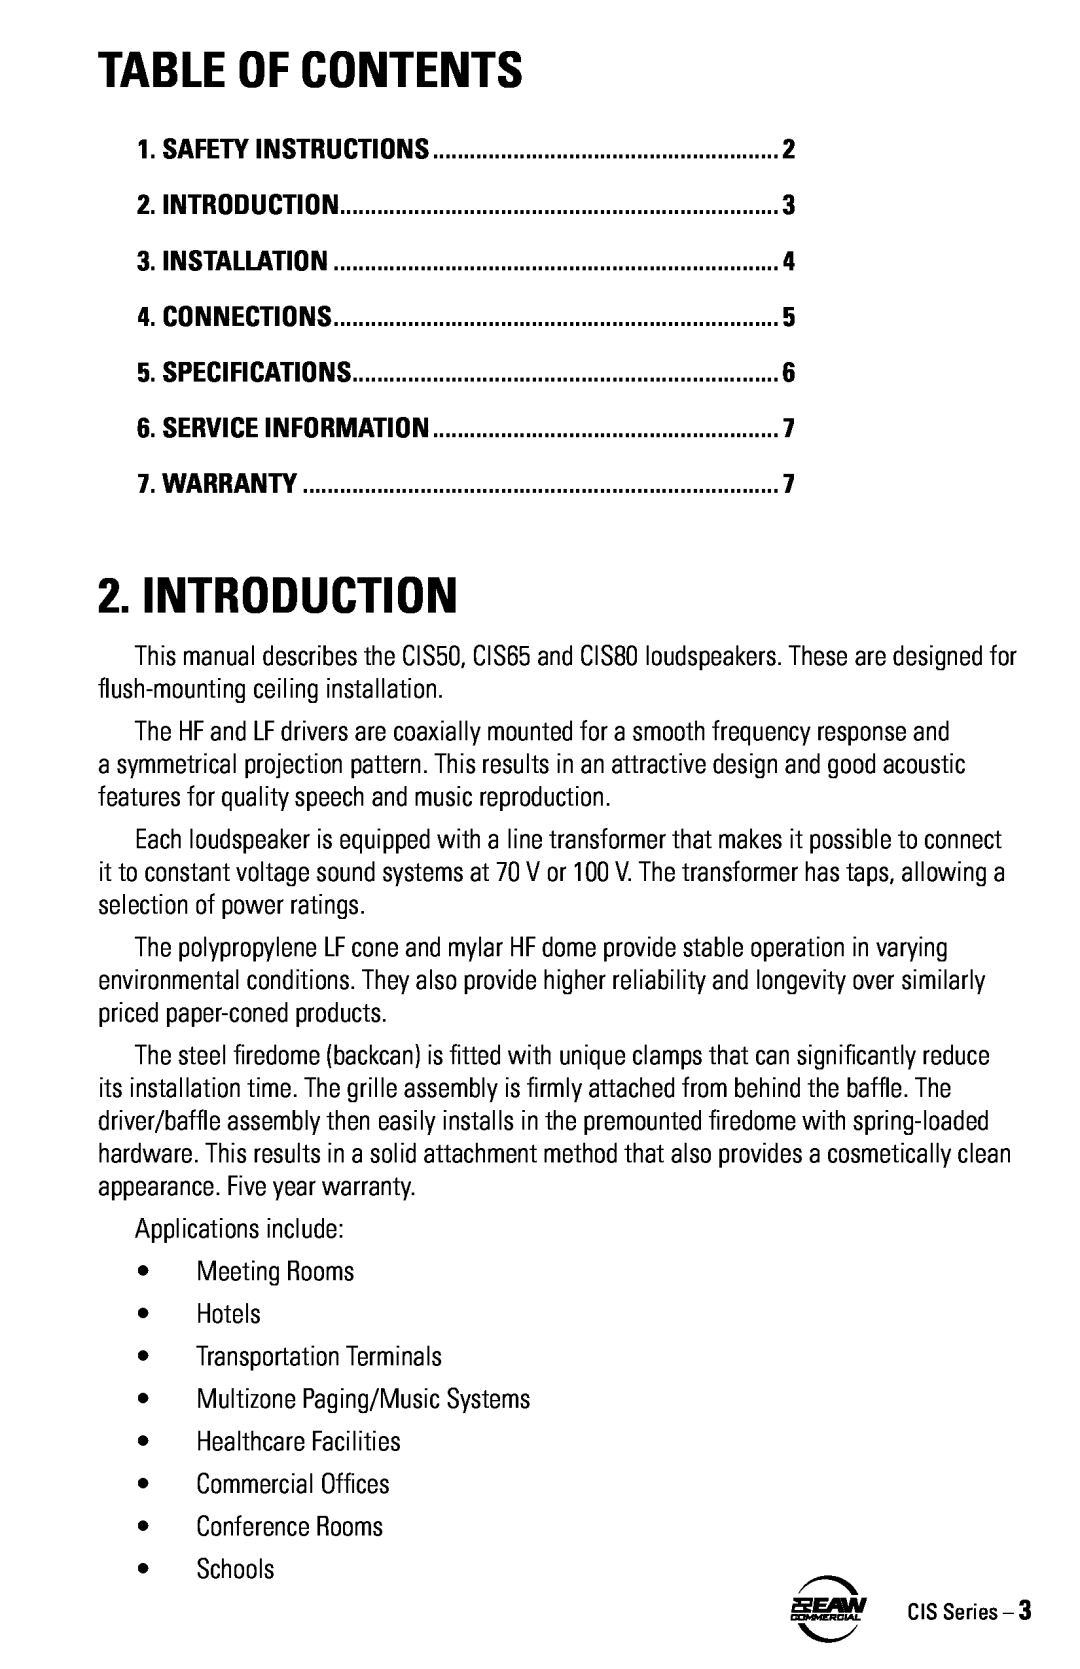 EAW CIS65, CIS80, CIS50 instruction manual Table Of Contents, Introduction 